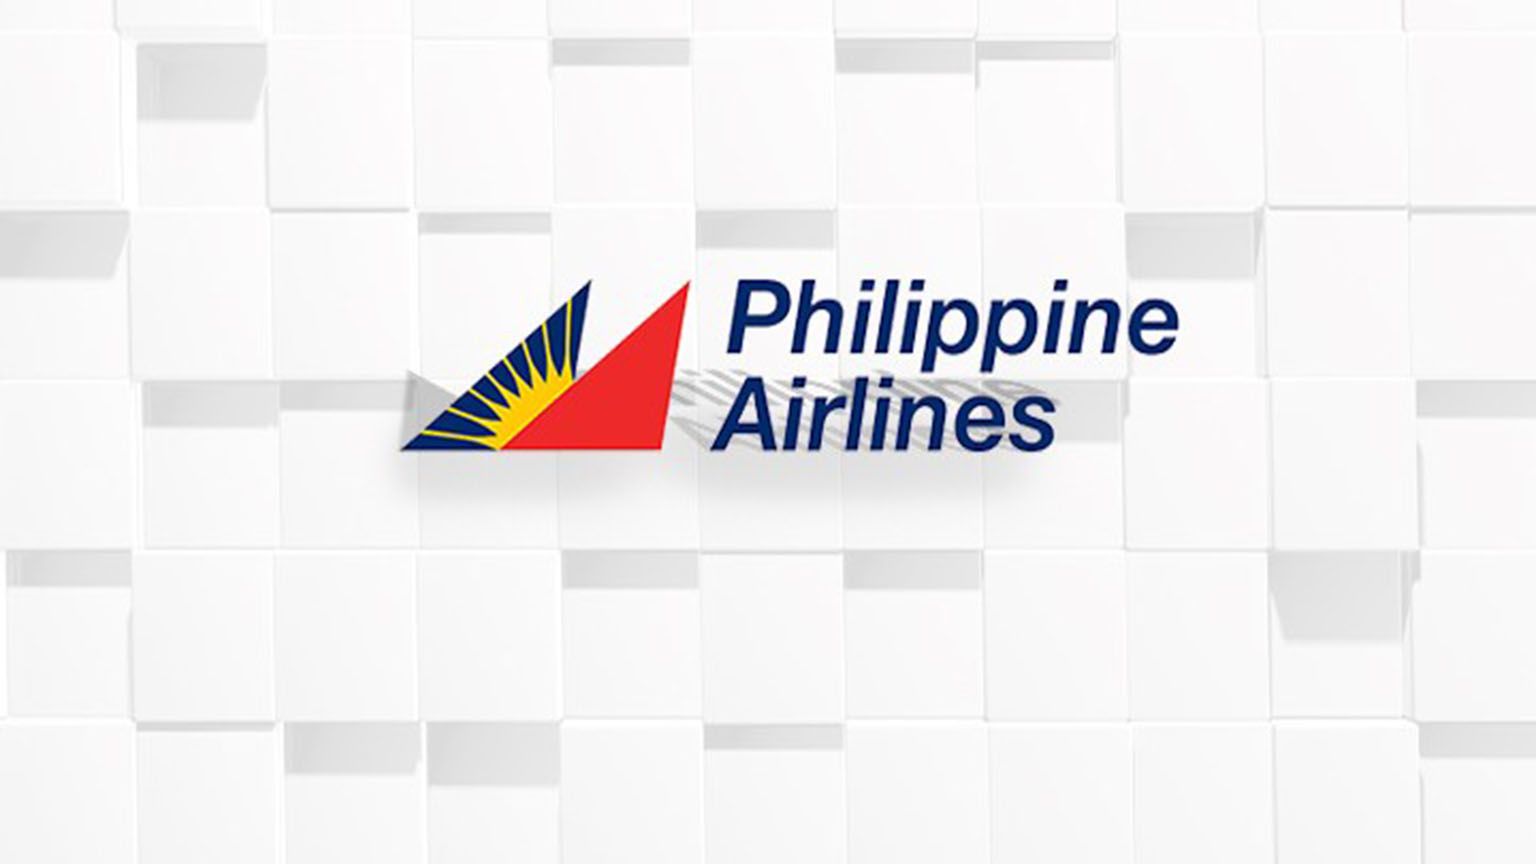 PAL apologizes for delays of luggage